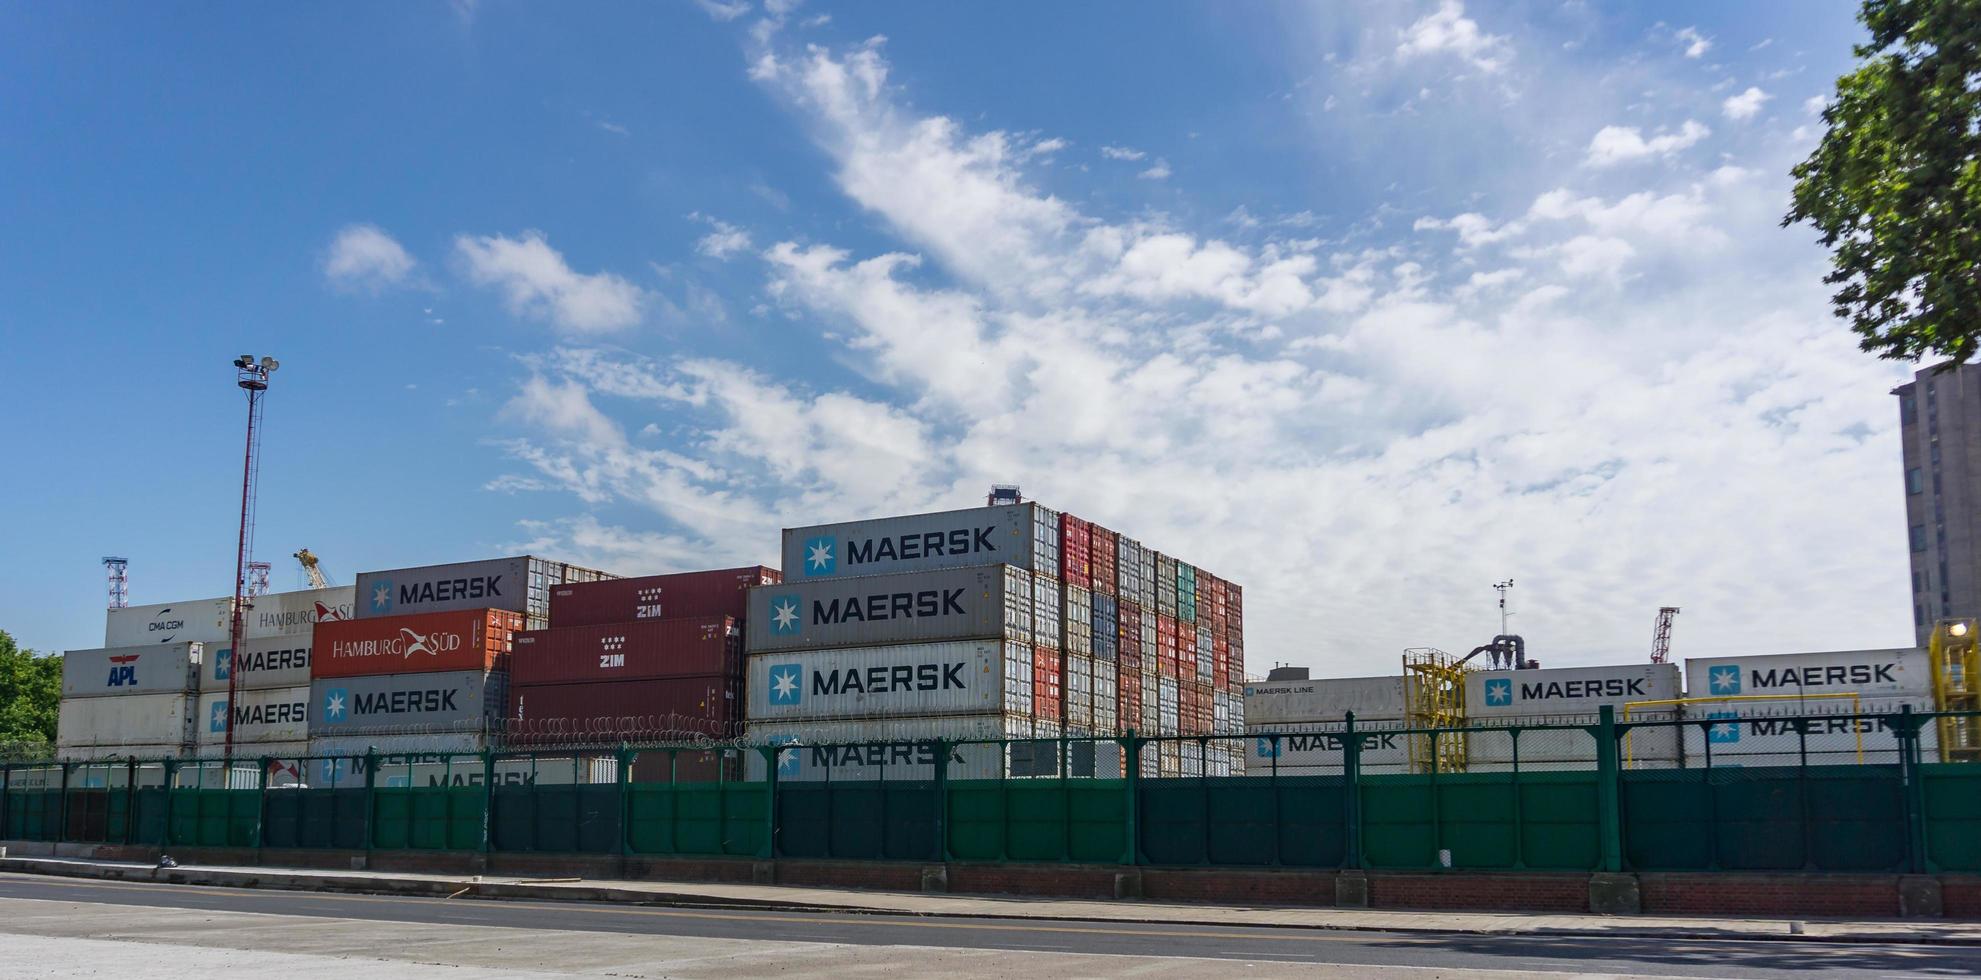 Buenos Aires, Argentina, 2019. Containers waiting outdoors photo